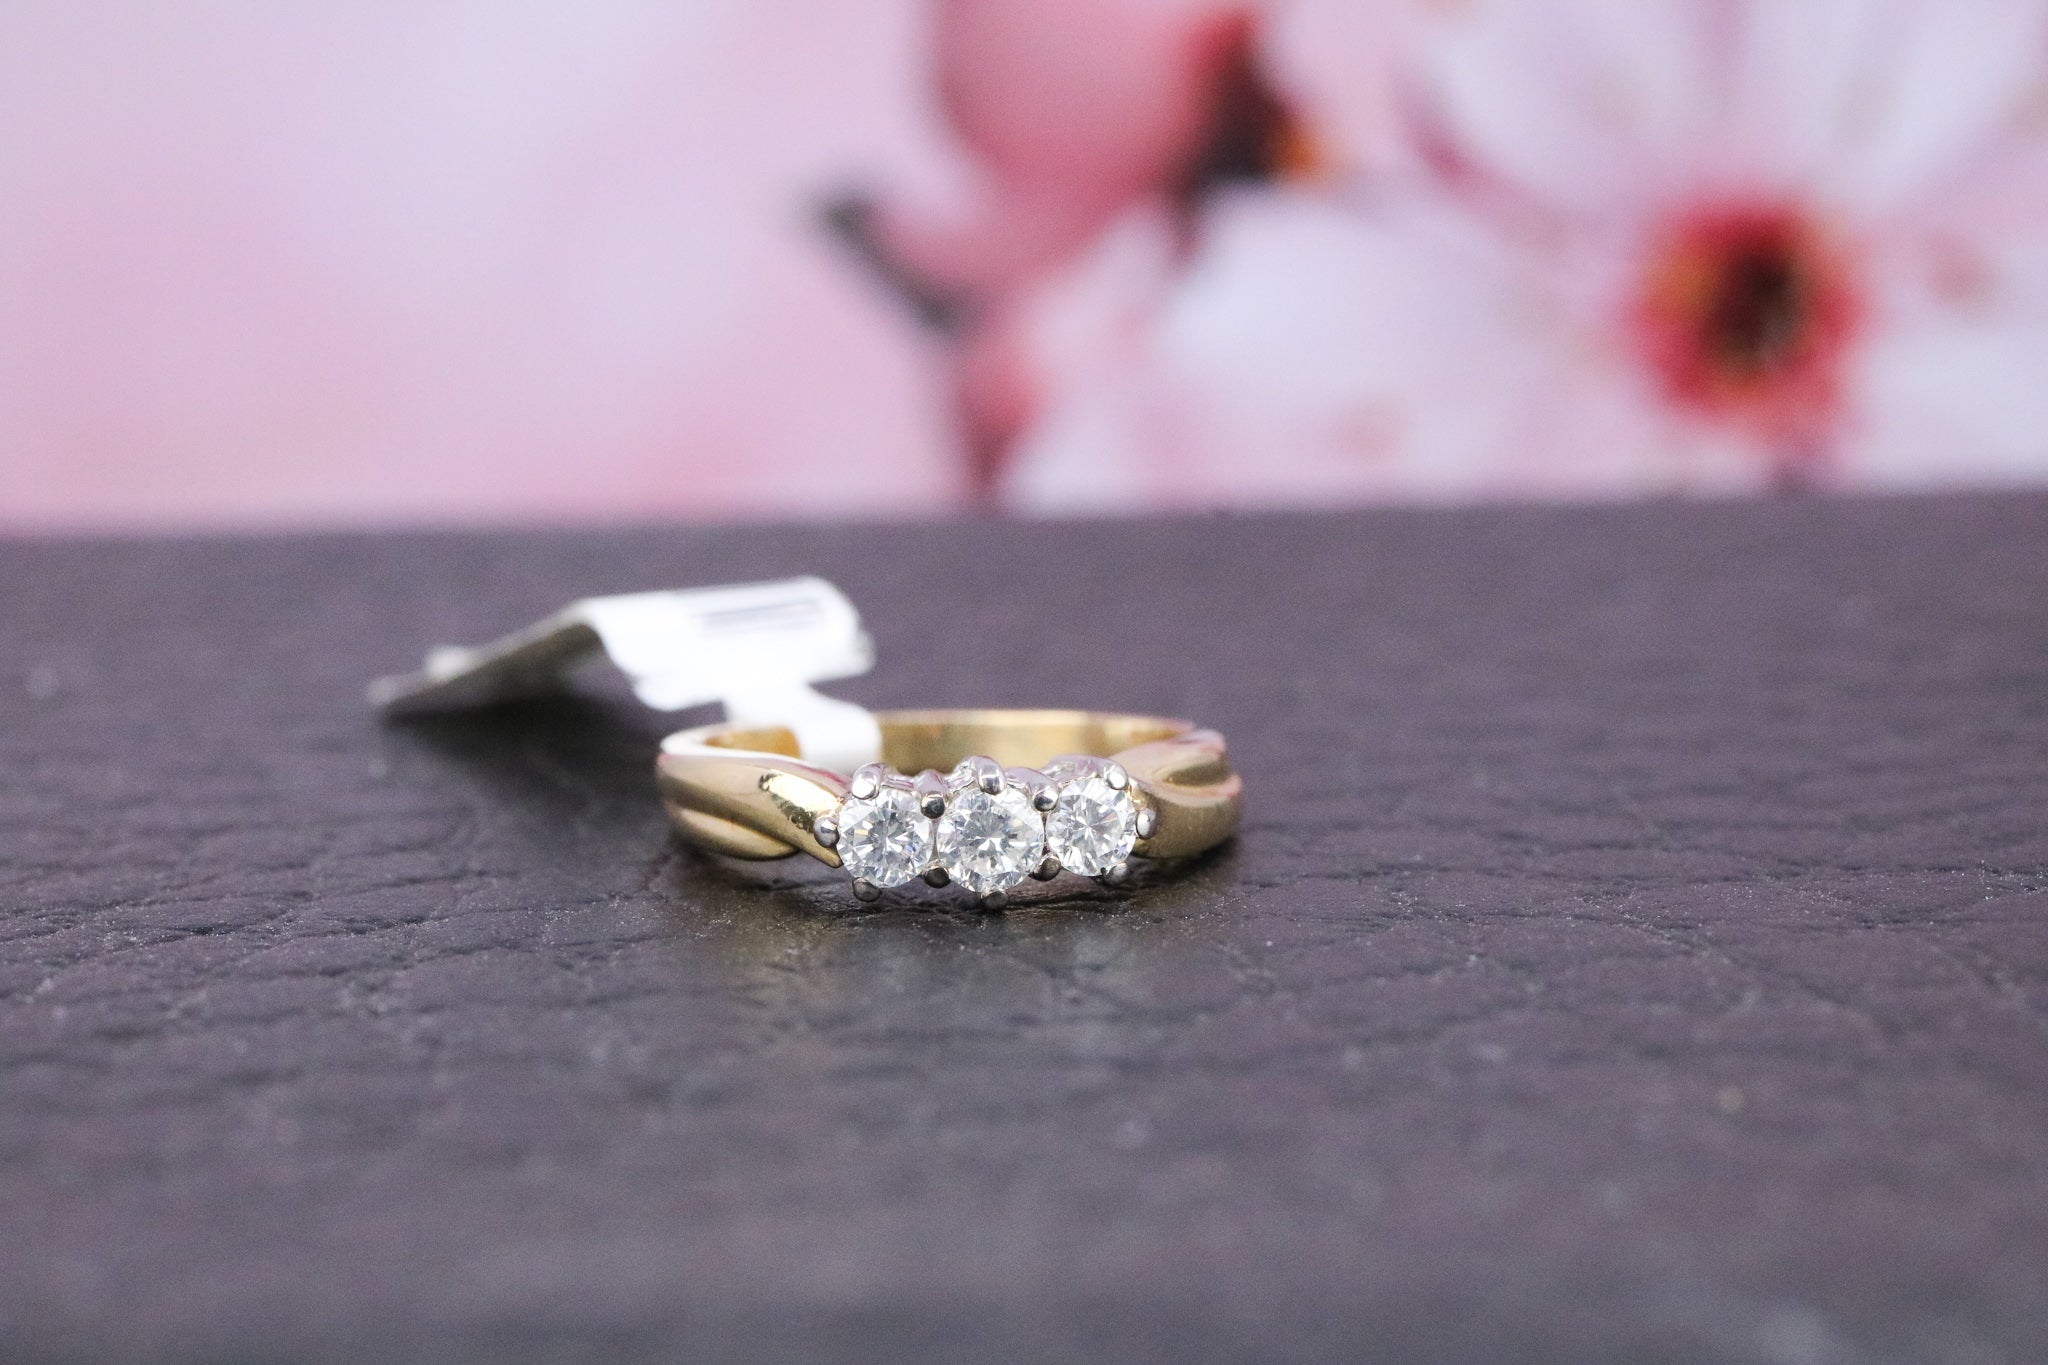 18ct Yellow Gold Diamond Ring - HJ2020 - Hallmark Jewellers Formby & The Jewellers Bench Widnes